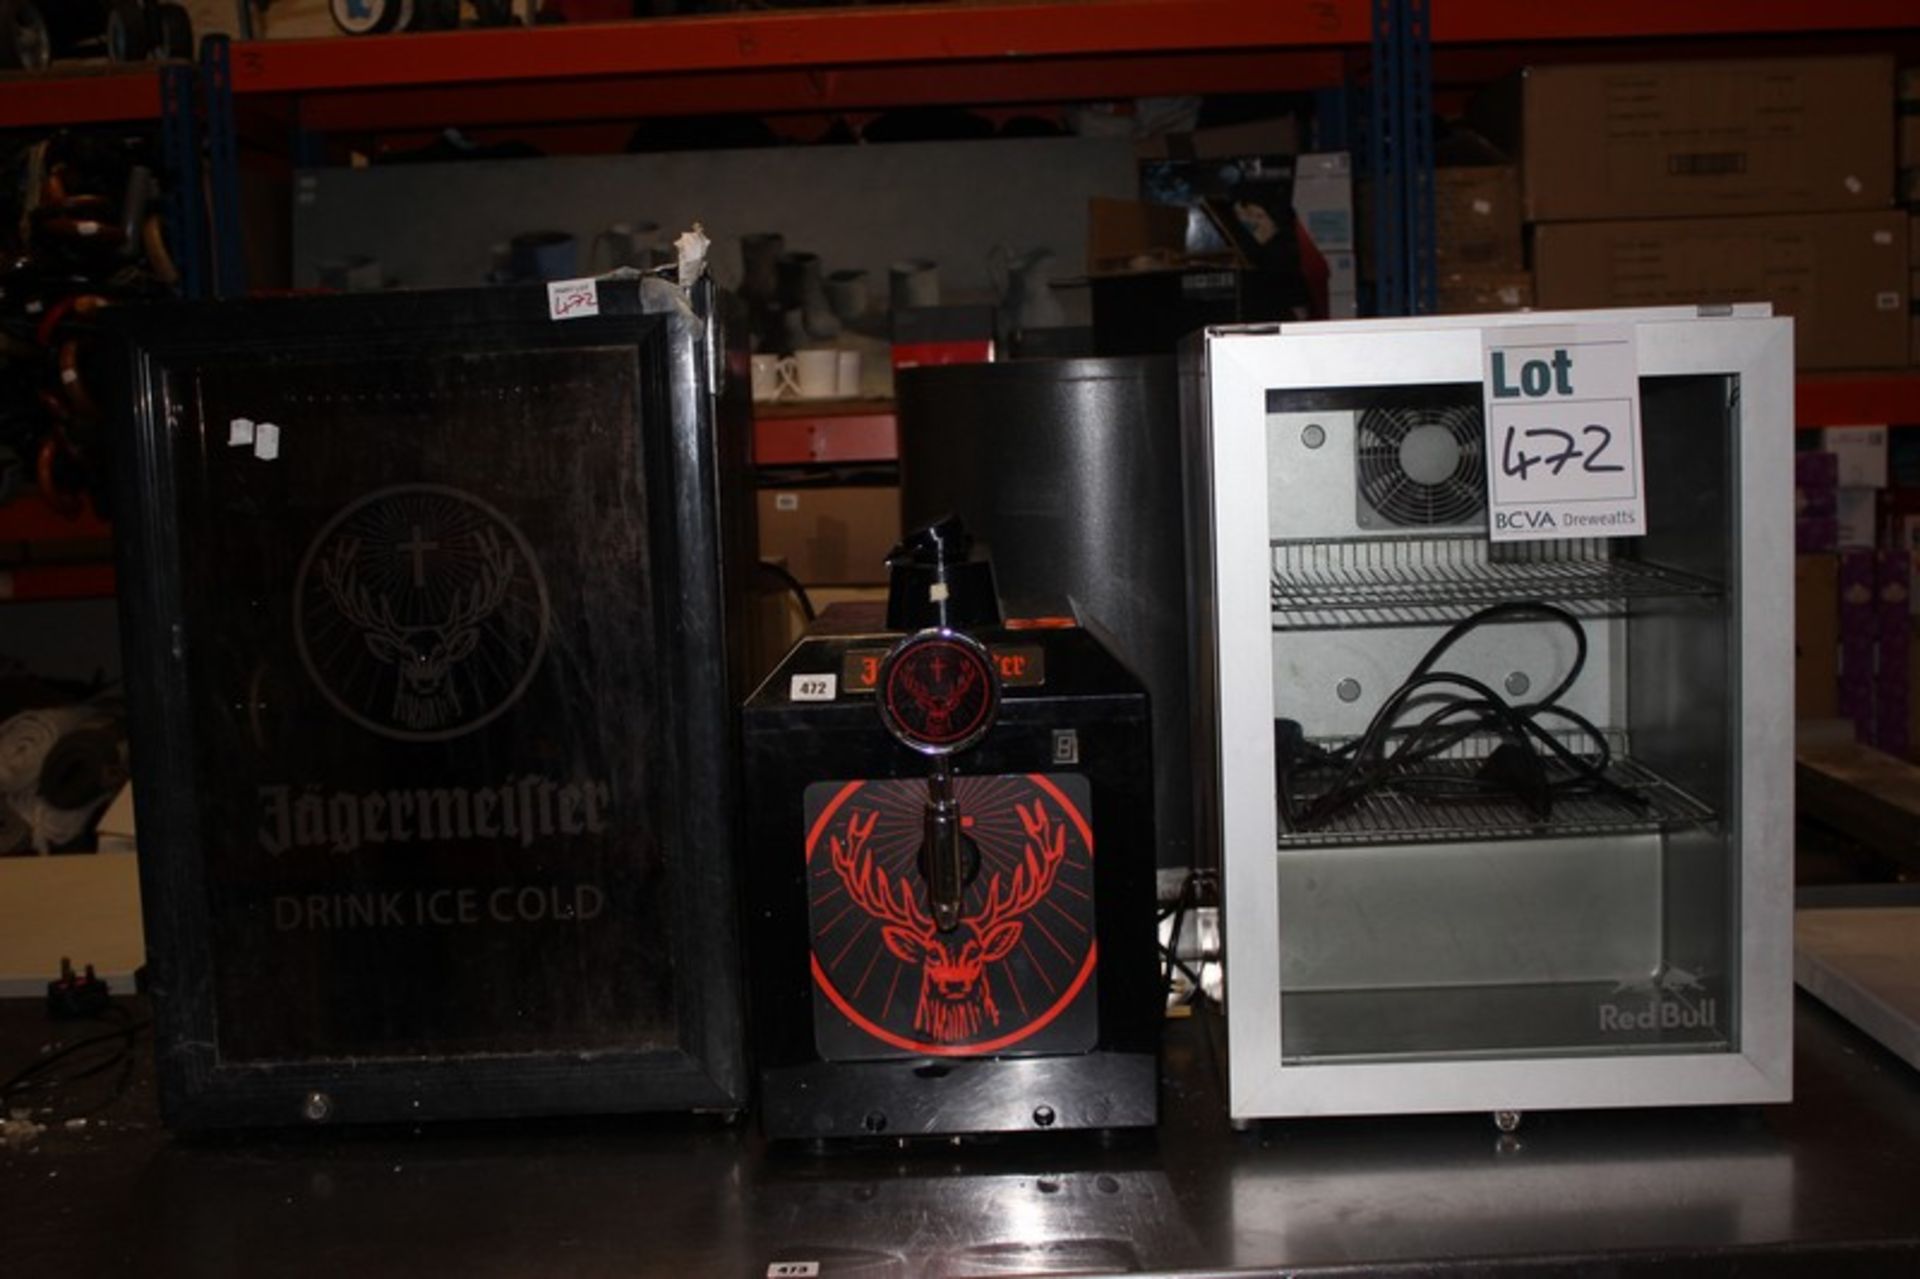 A Red Bull branded glazed canned drinks chiller, Jagermeister branded glass freezer and Jagermeister